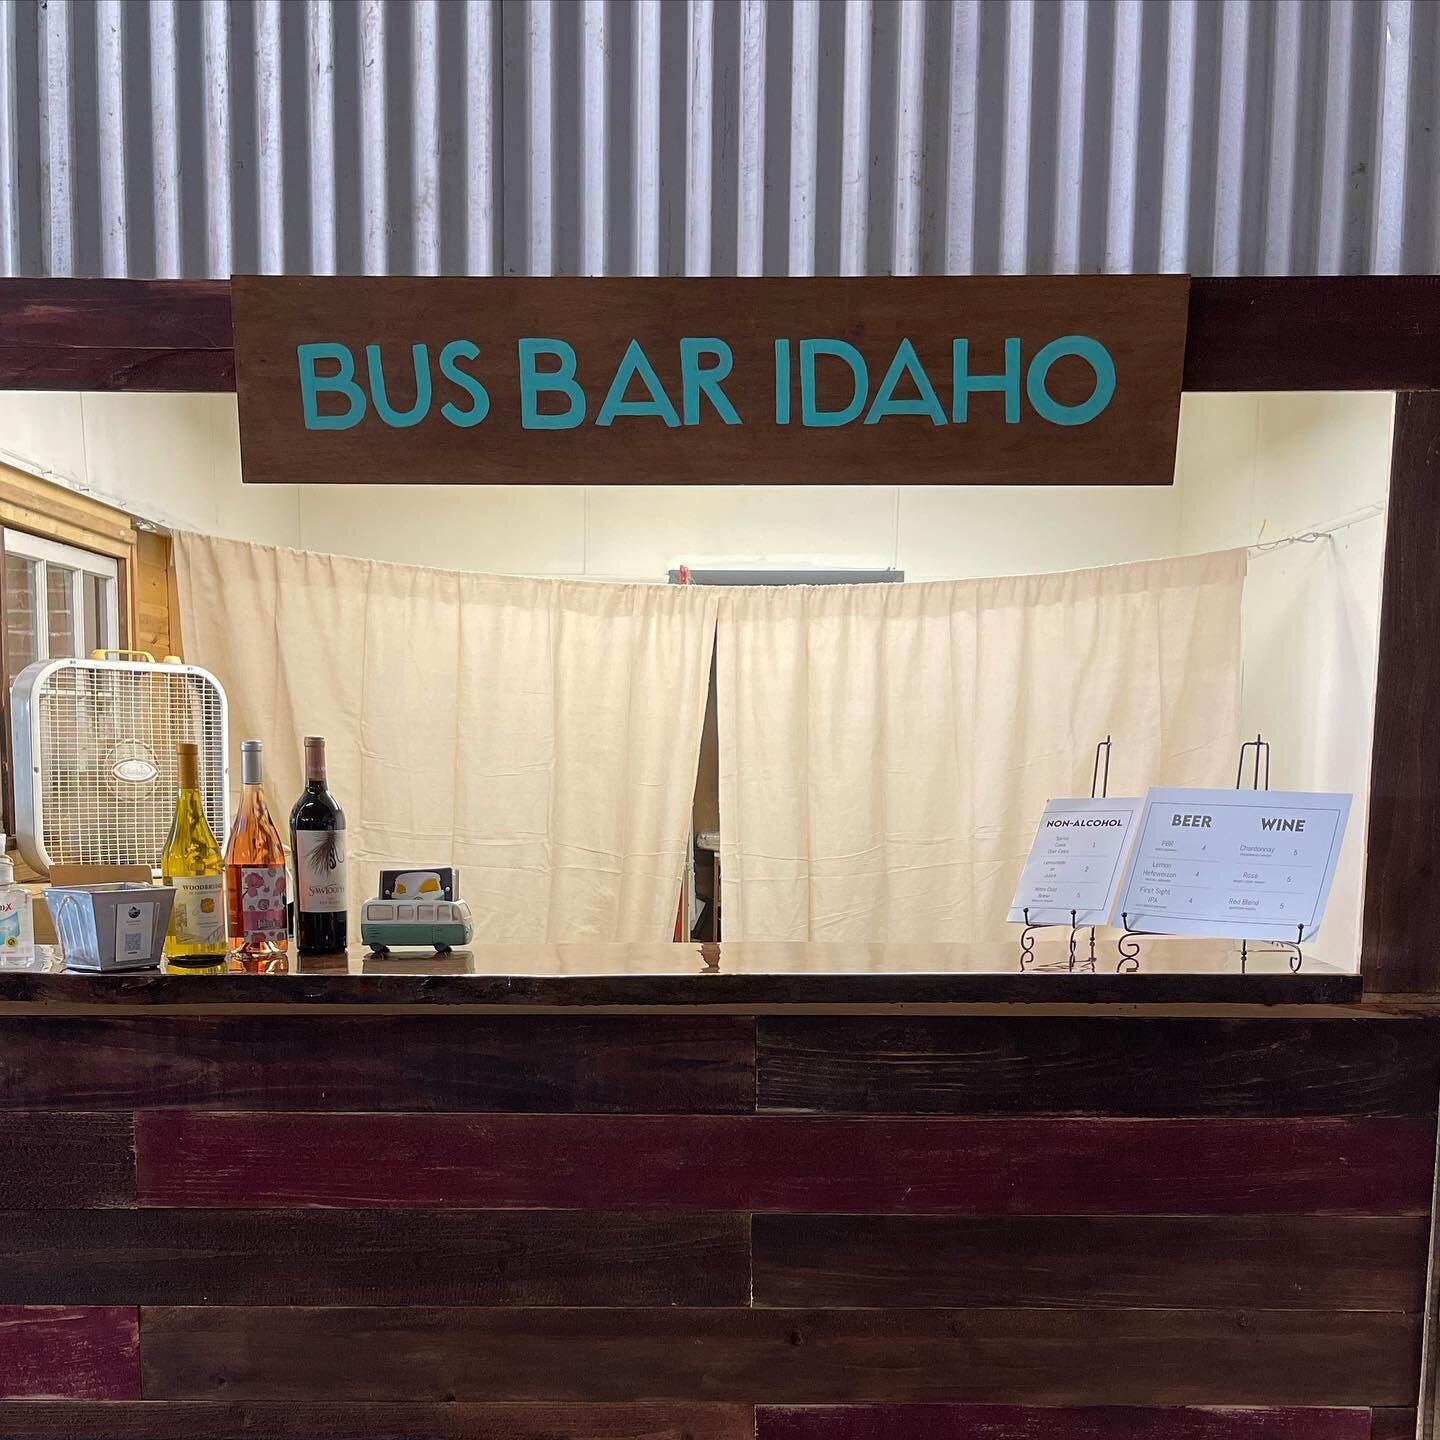 If the bus doesn&rsquo;t fit in the front door, we can still come by and do a pop-up bar! This evening we are at the soft opening of The Merc in Weiser, hosted by @station30_collectibles. Come say hi, try some wine, find a new treasure, and support a